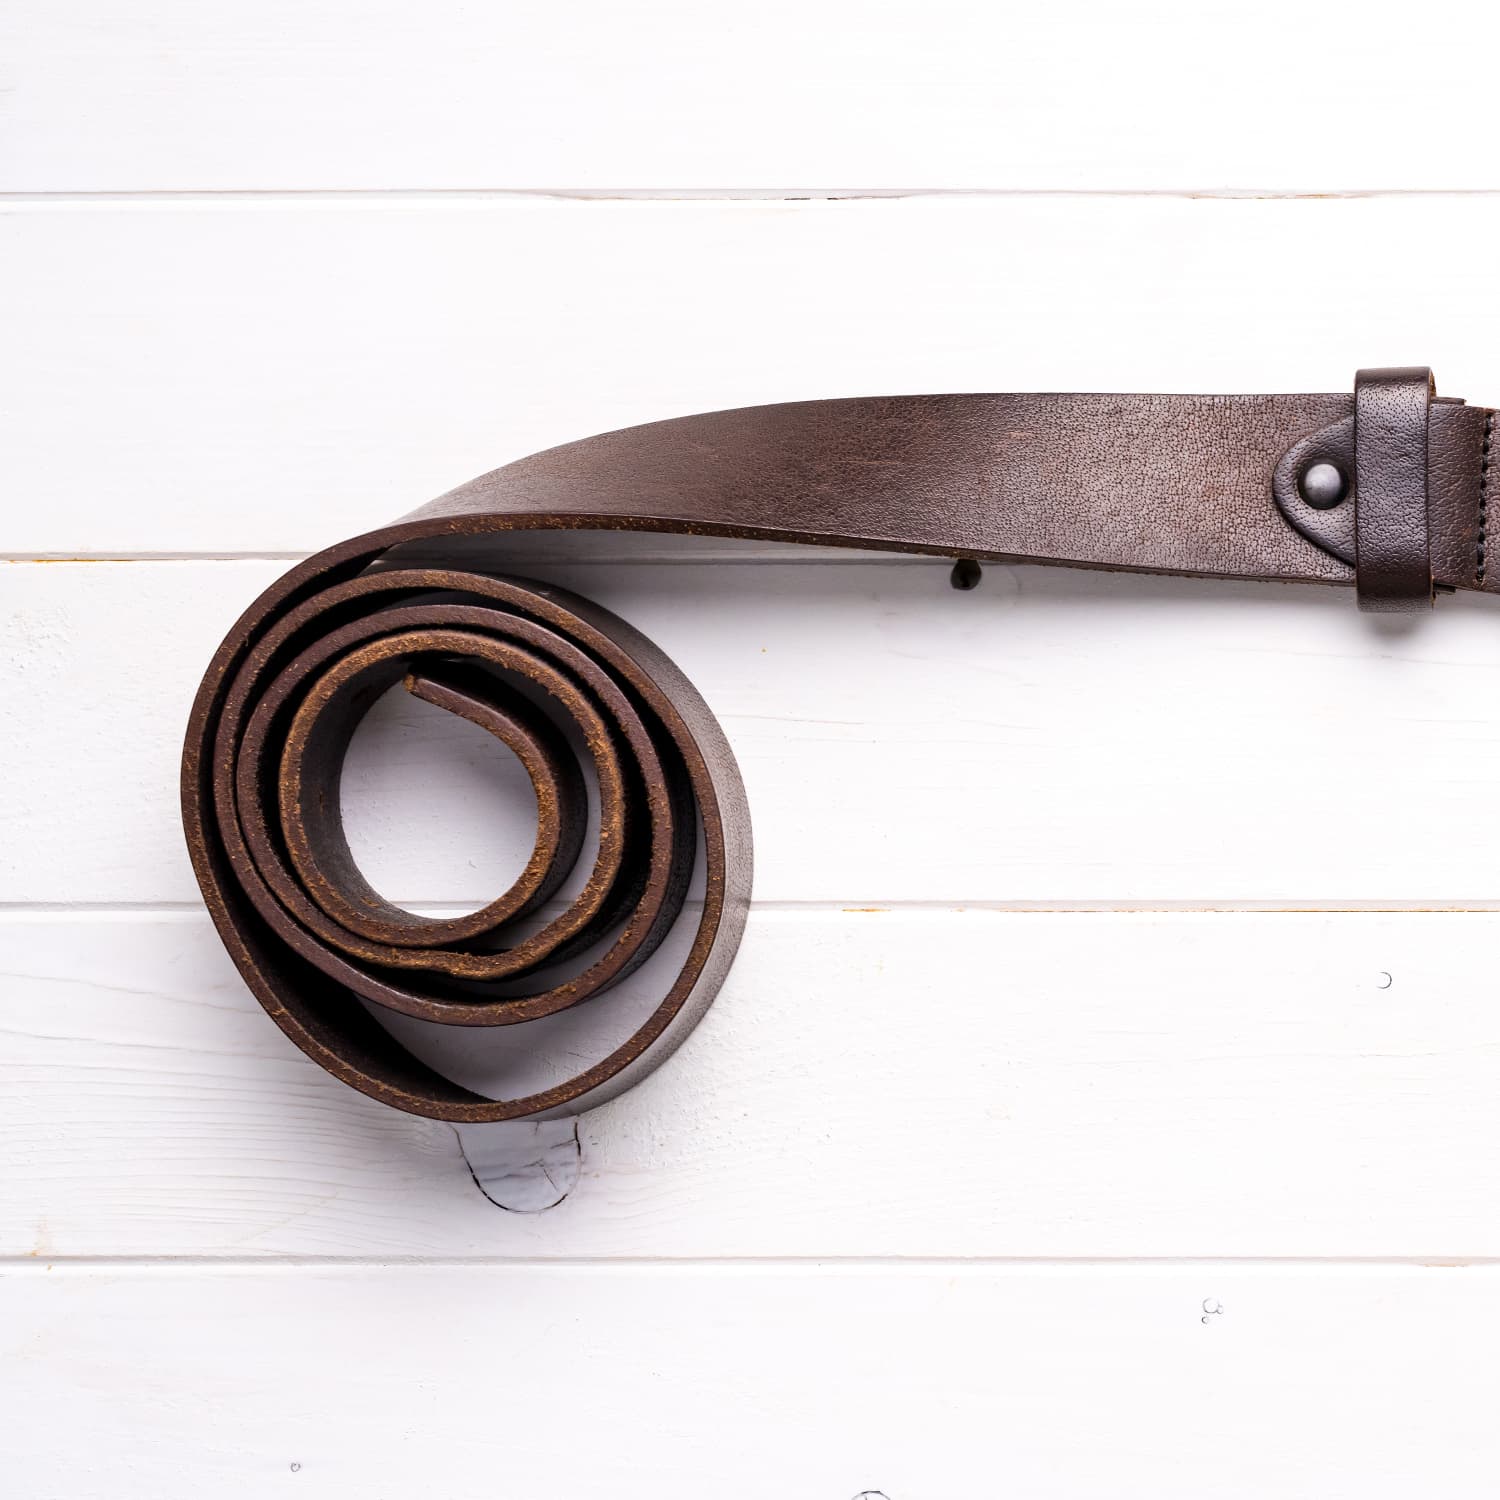 New Reuses For Old Leather Belts - Cool Ways to Reuse Old Leather Belts